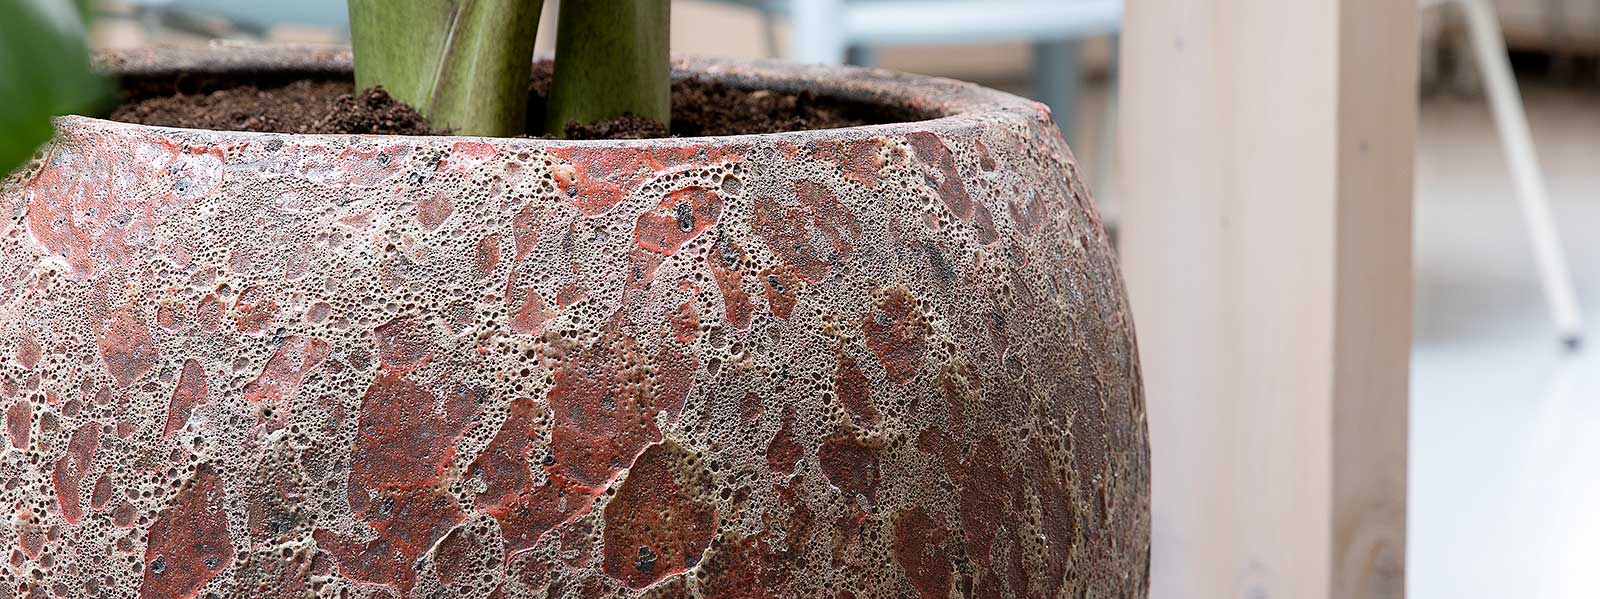 The Lava Planters Collection